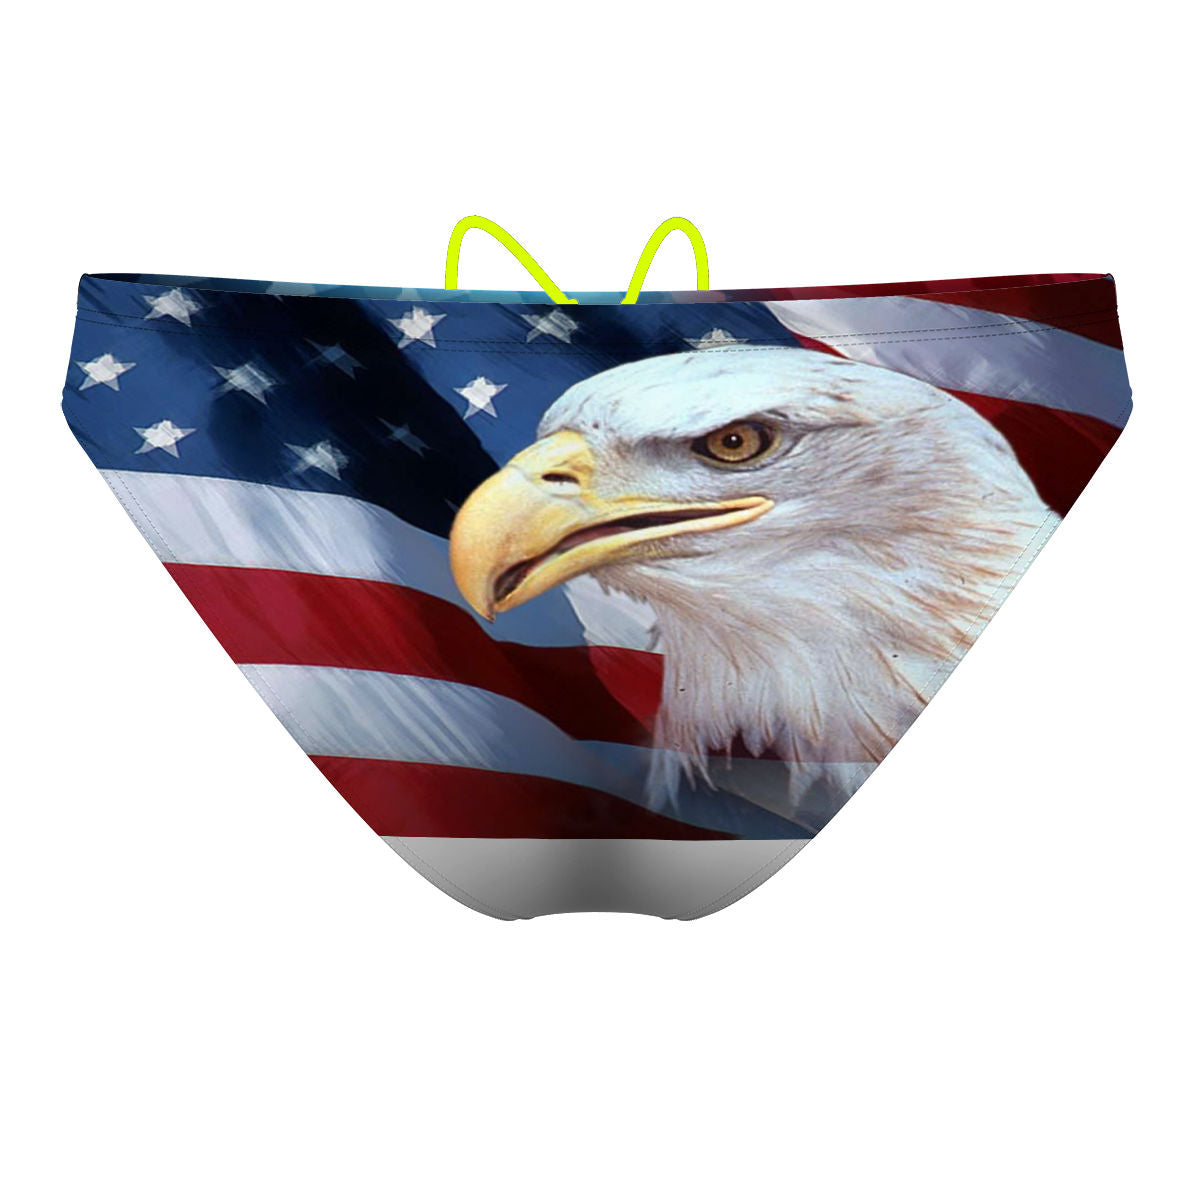 USA Polo - Waterpolo Brief Swimsuit